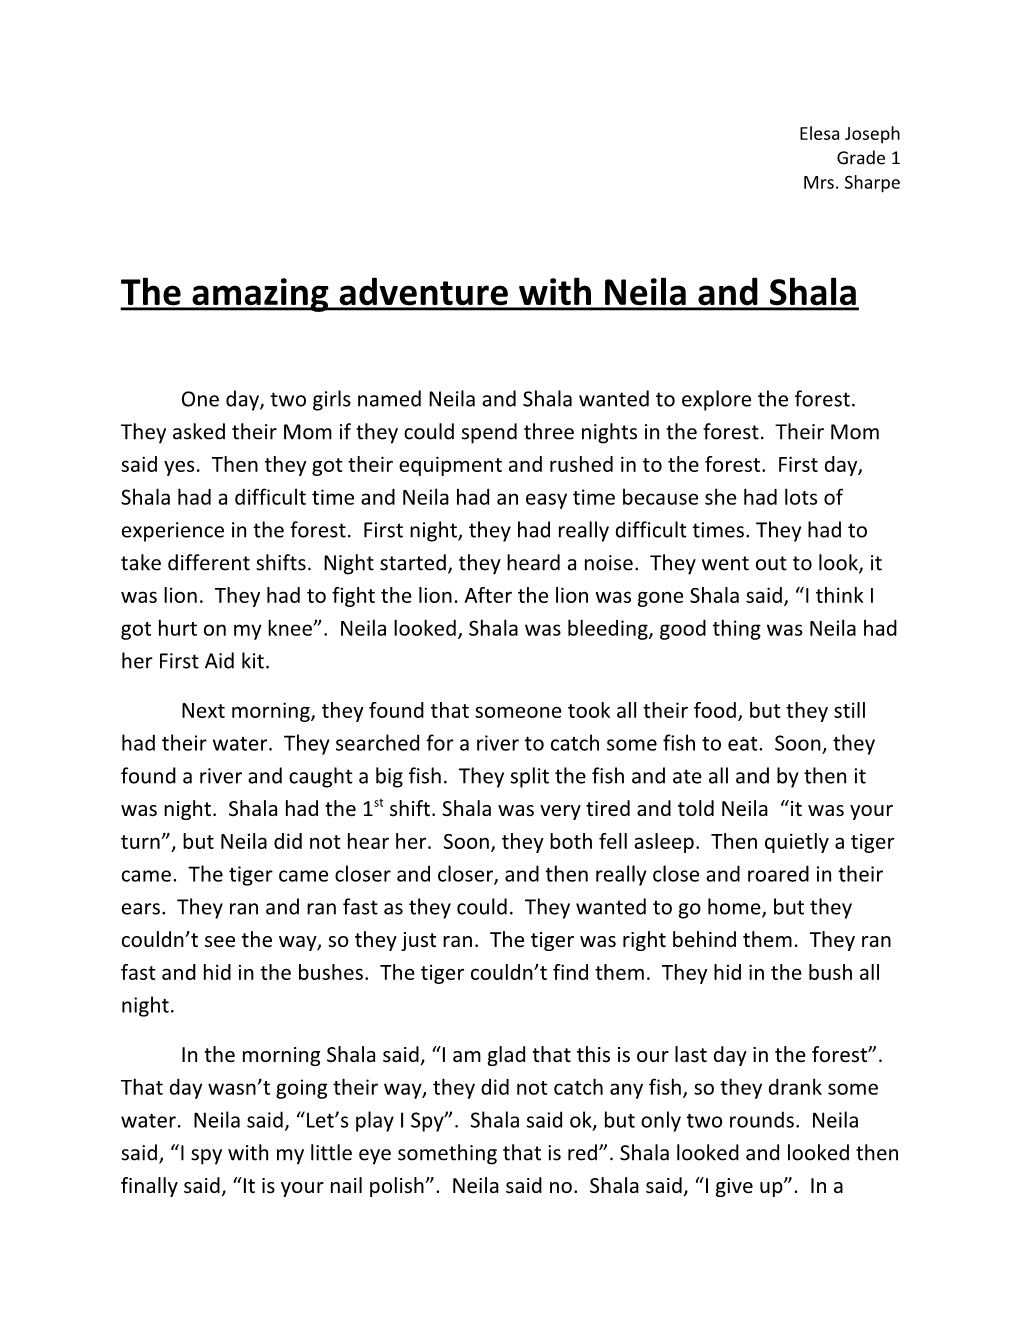 The Amazing Adventure with Neila and Shala